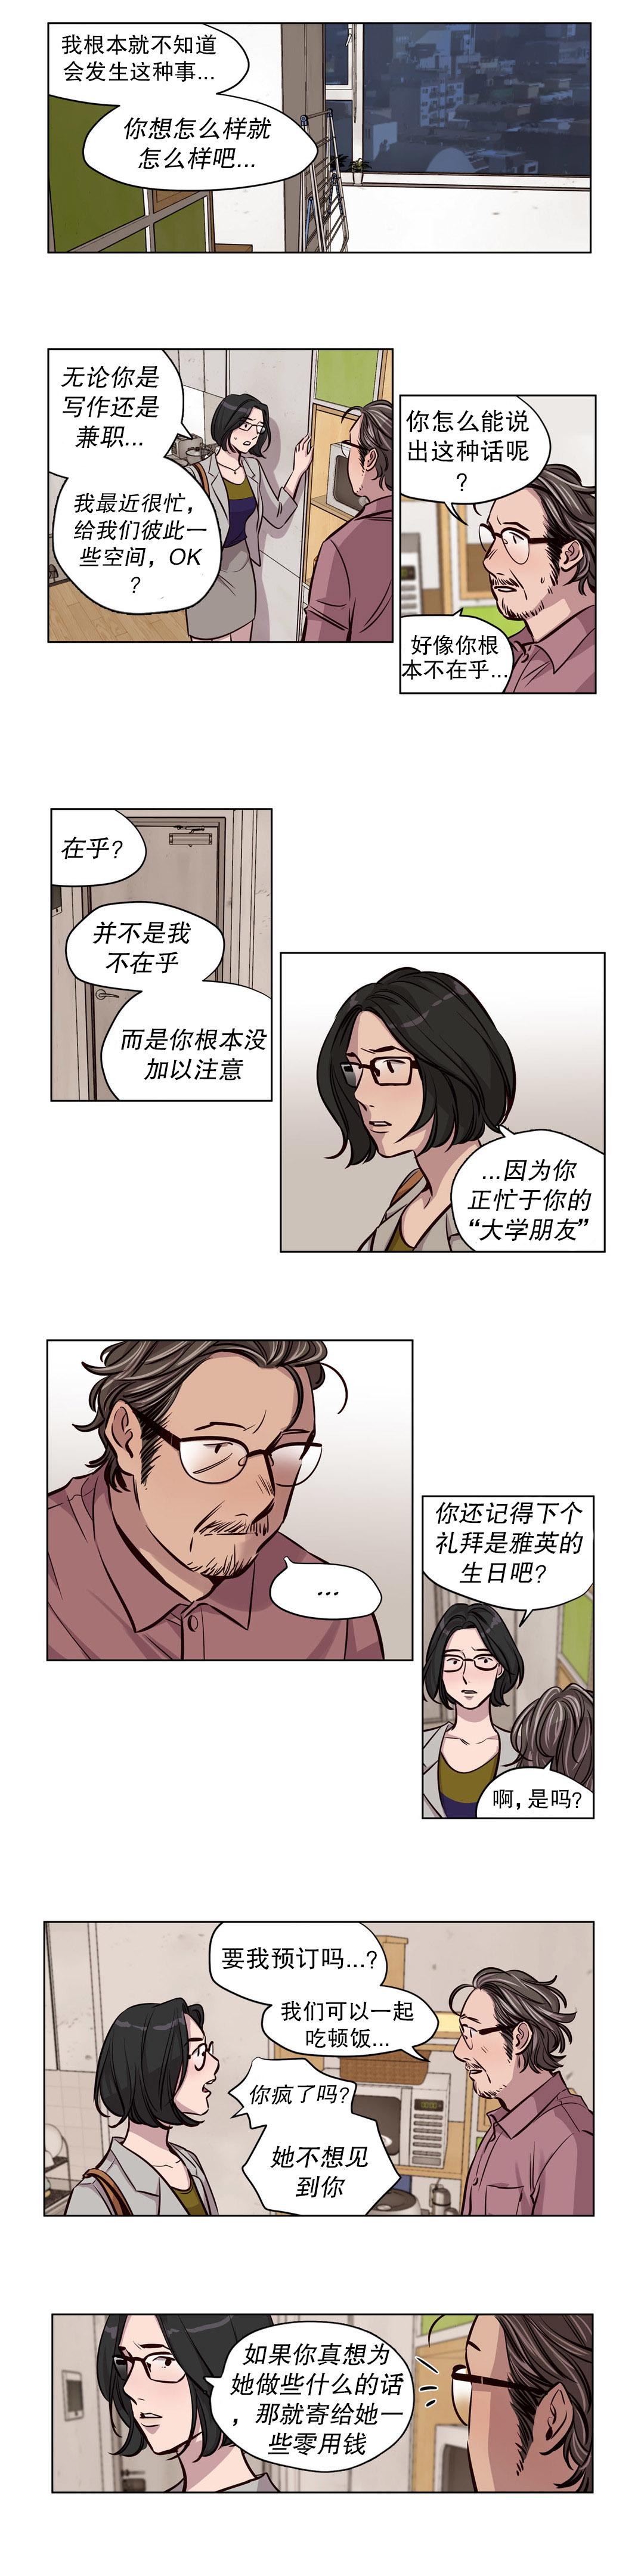 [Ramjak] 赎罪营(Atonement Camp) Ch.50-52 (Chinese) 6